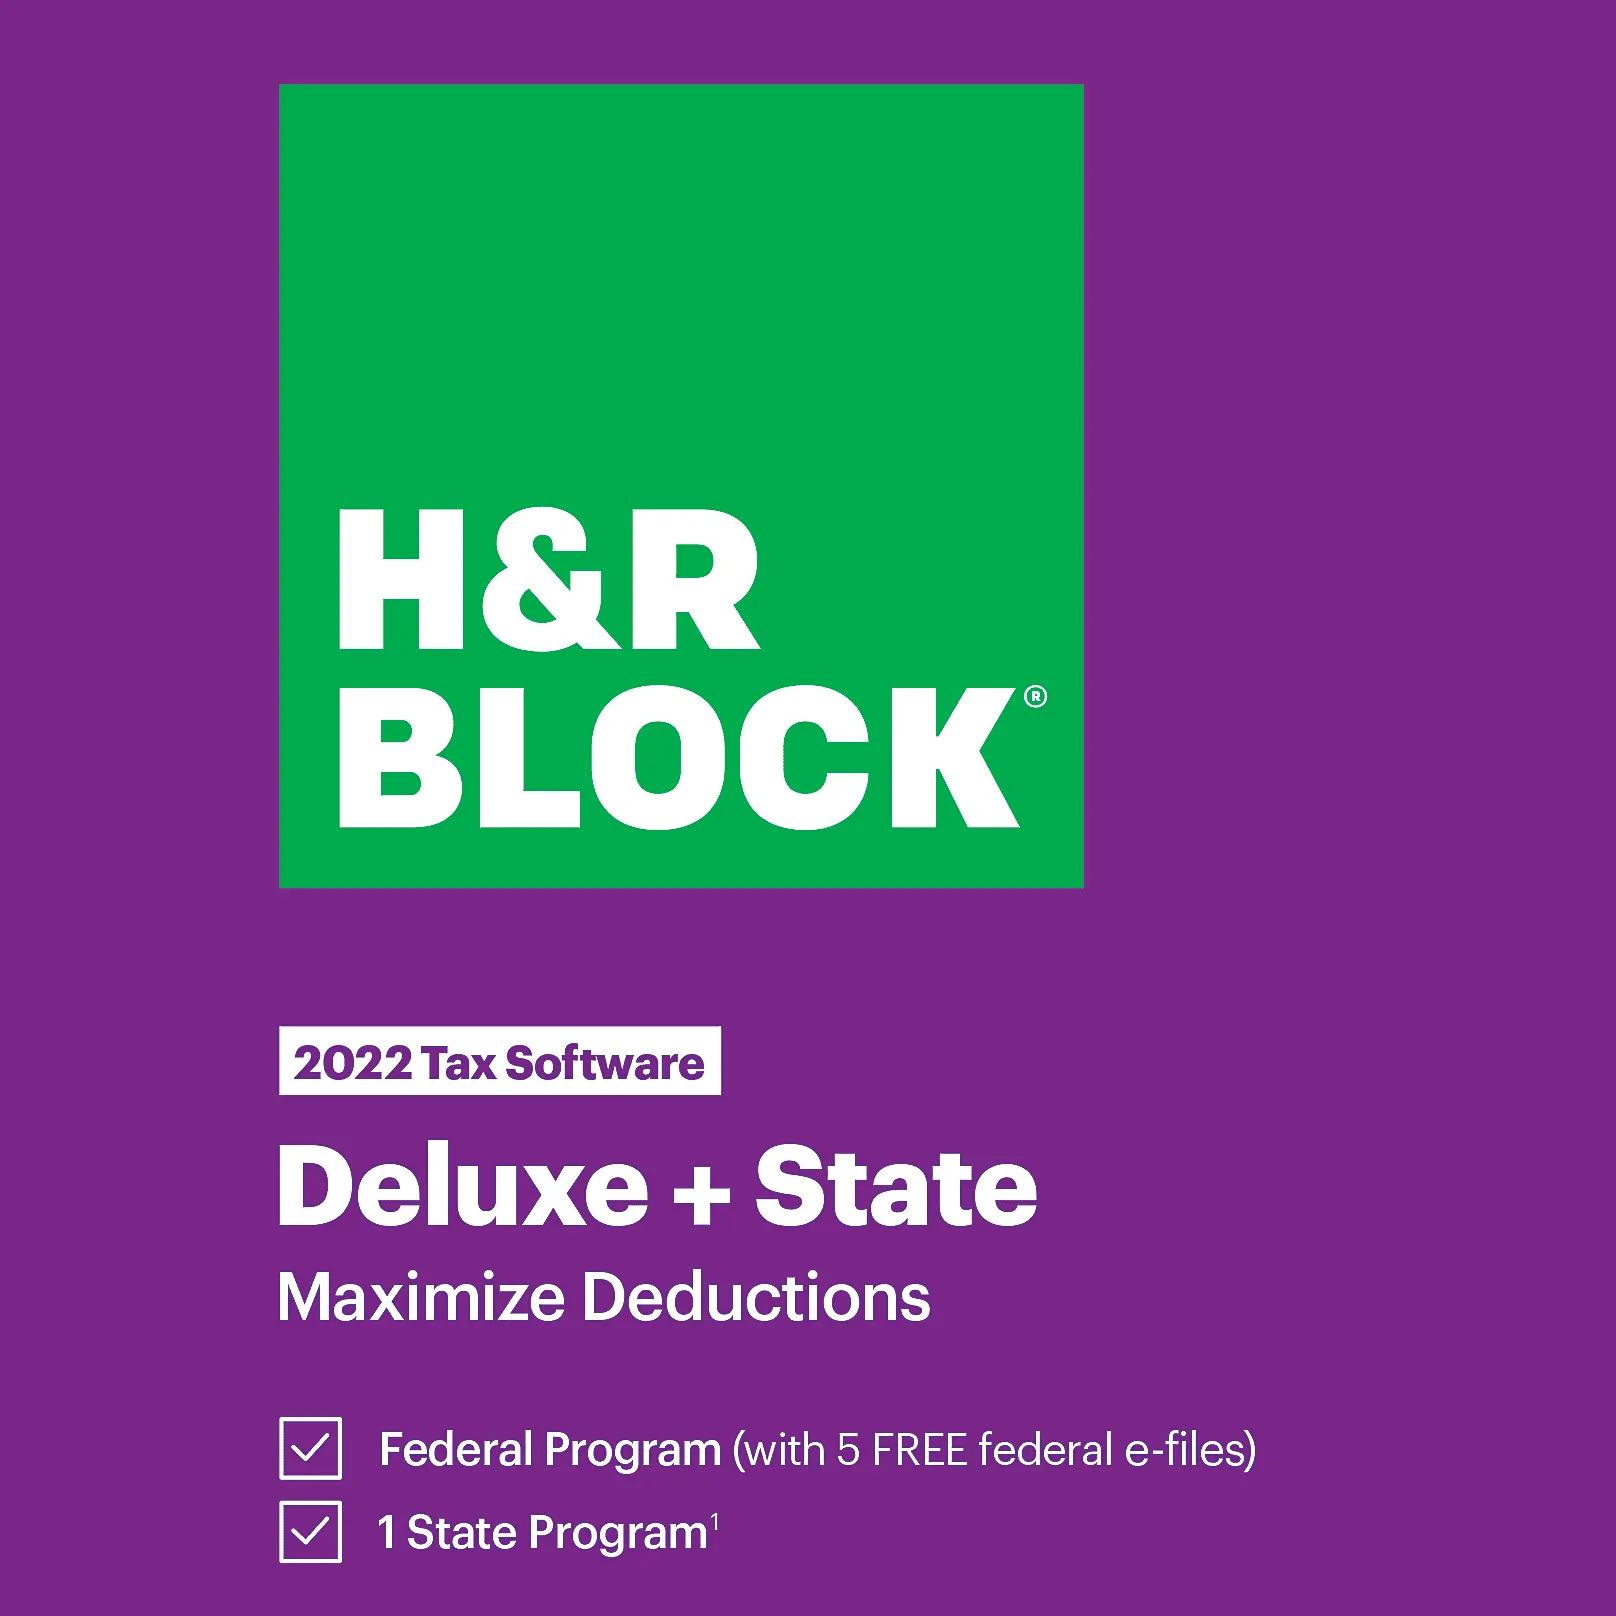 HR Block Deluxe 2022 Tax Software for $17.49